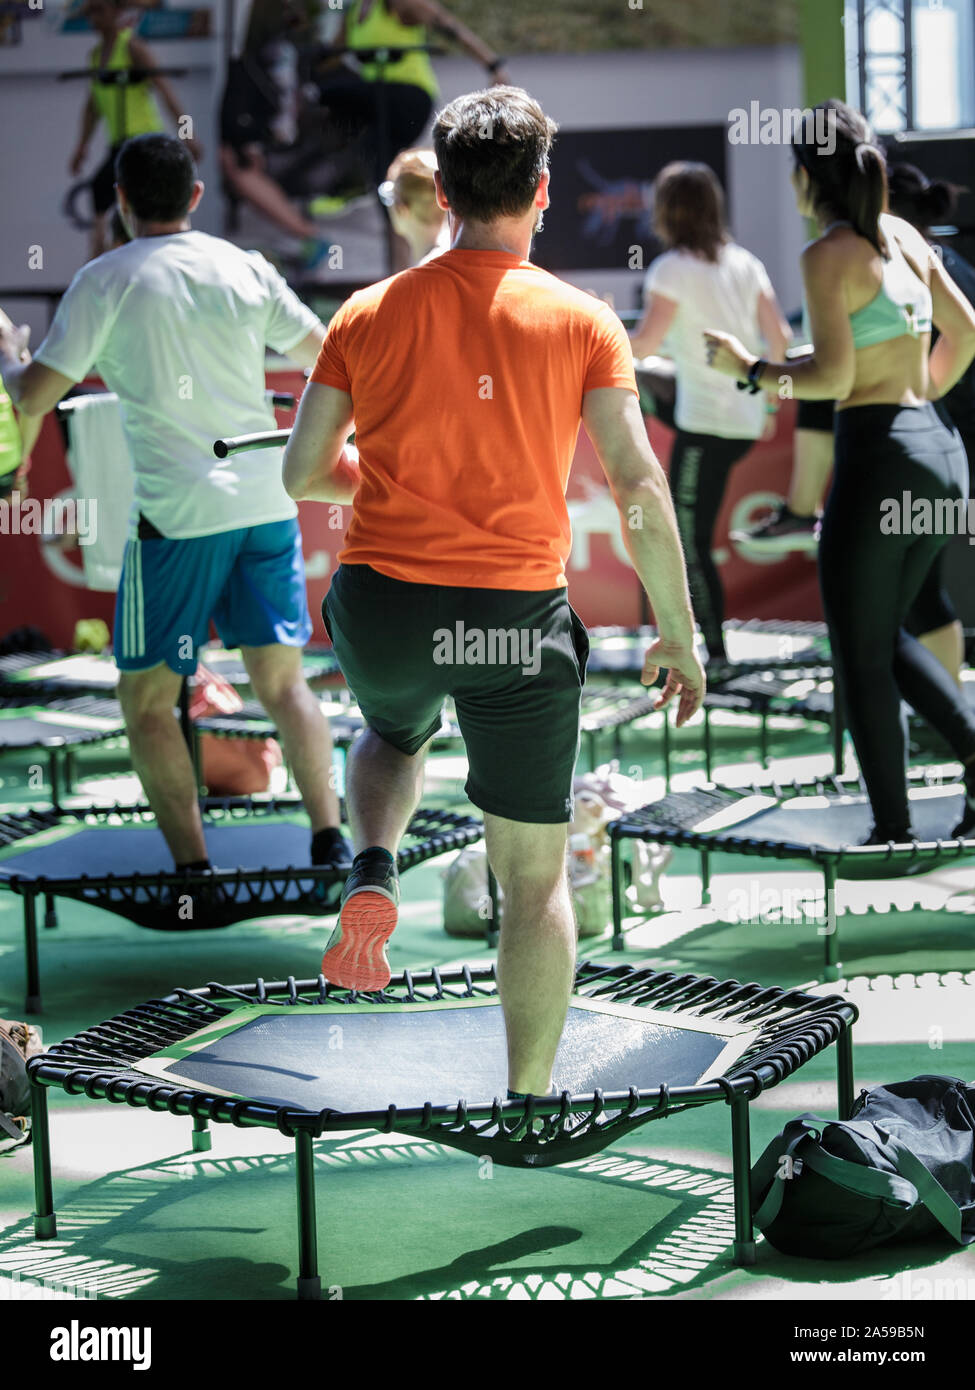 Mini Rebounder Workout - People doing Fitness Exercise in Class at Gym with  Music and Teacher on Stage Stock Photo - Alamy